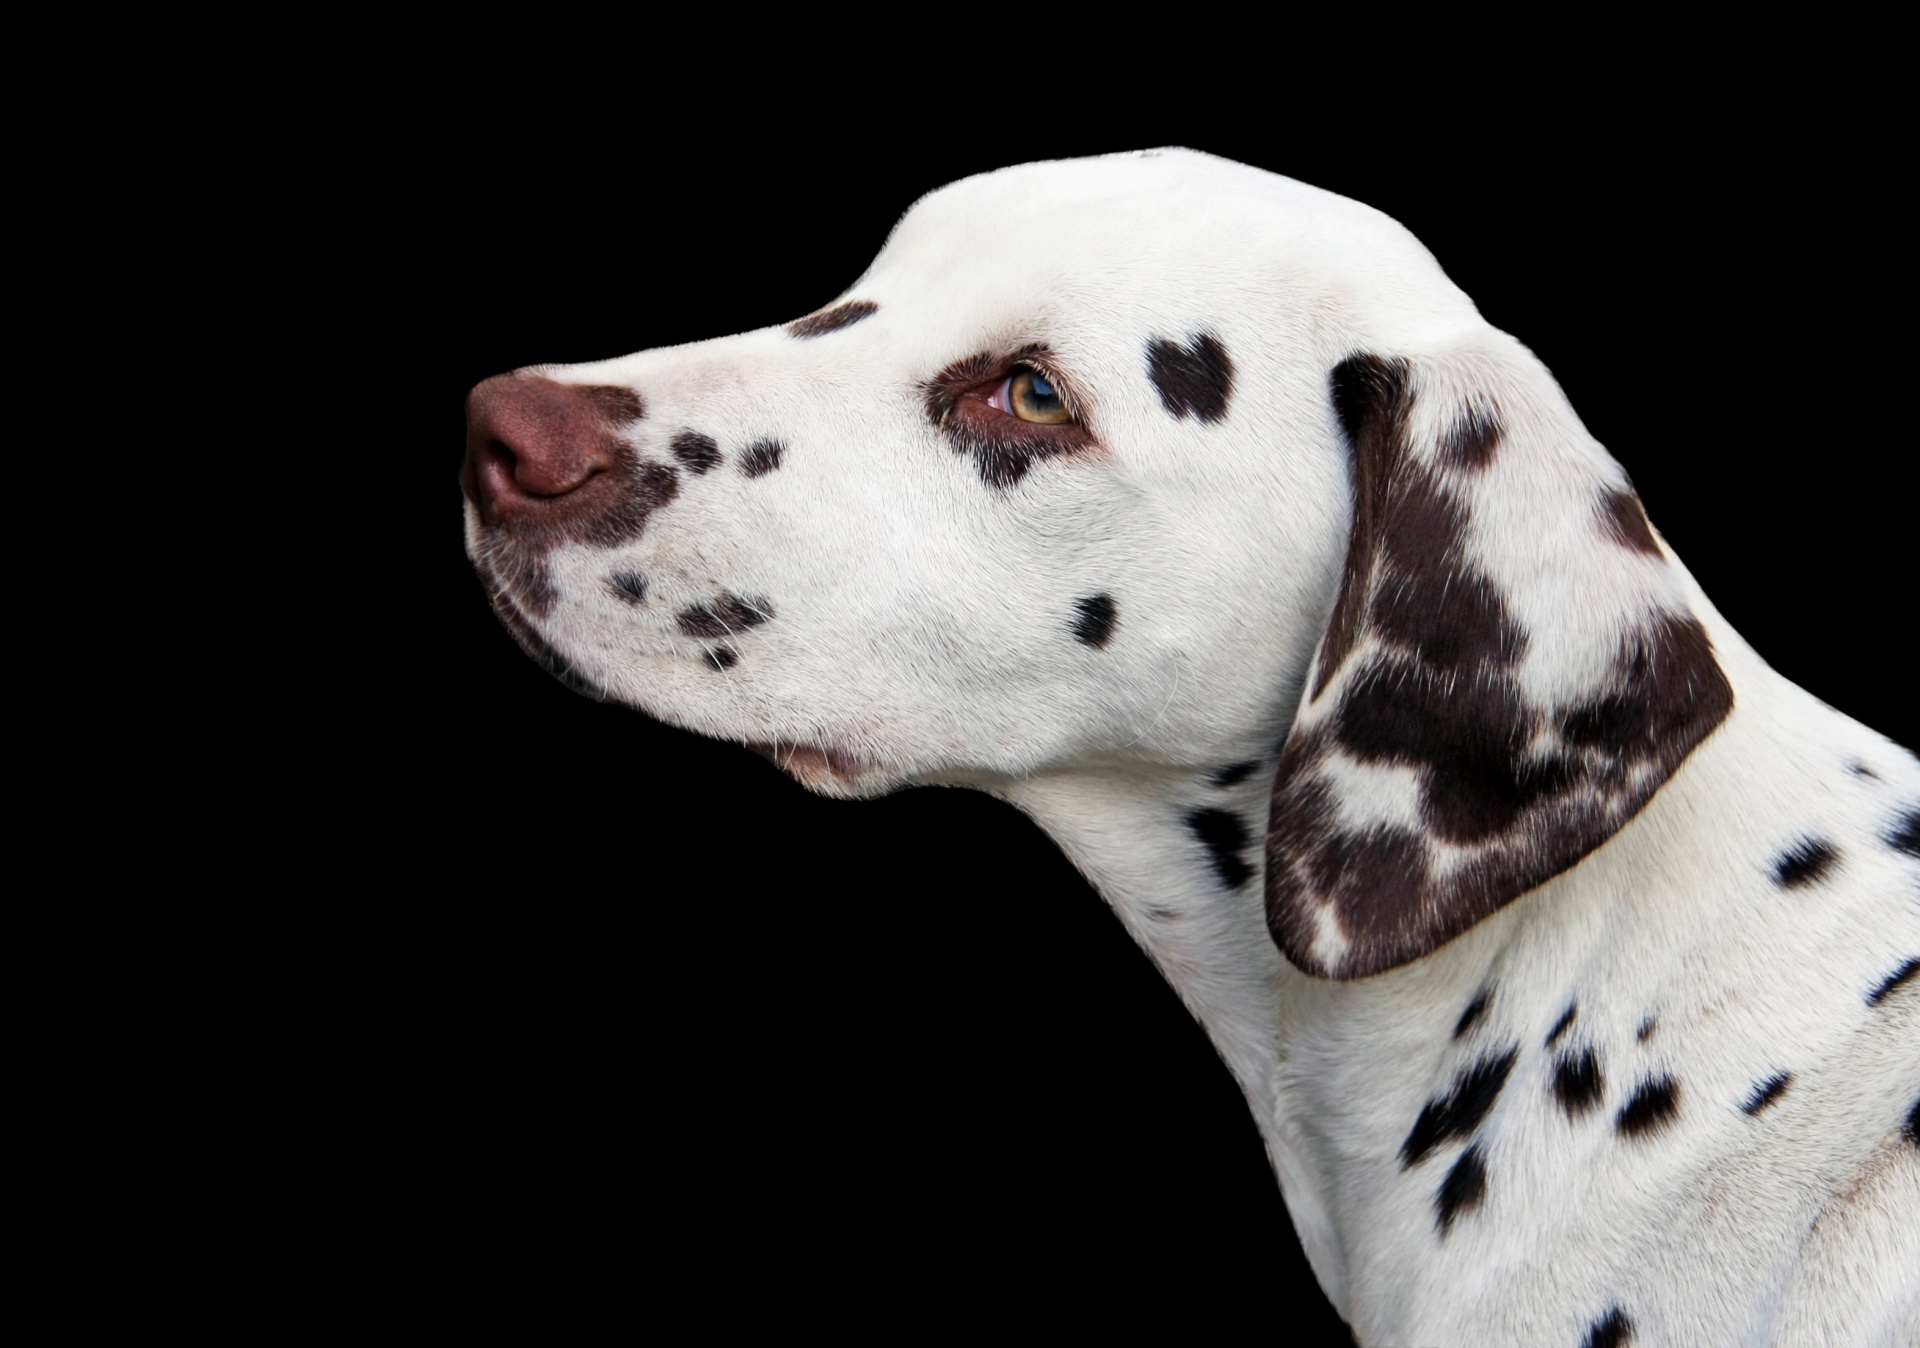 Young dalmatian puppy dog portrait isolated on black background